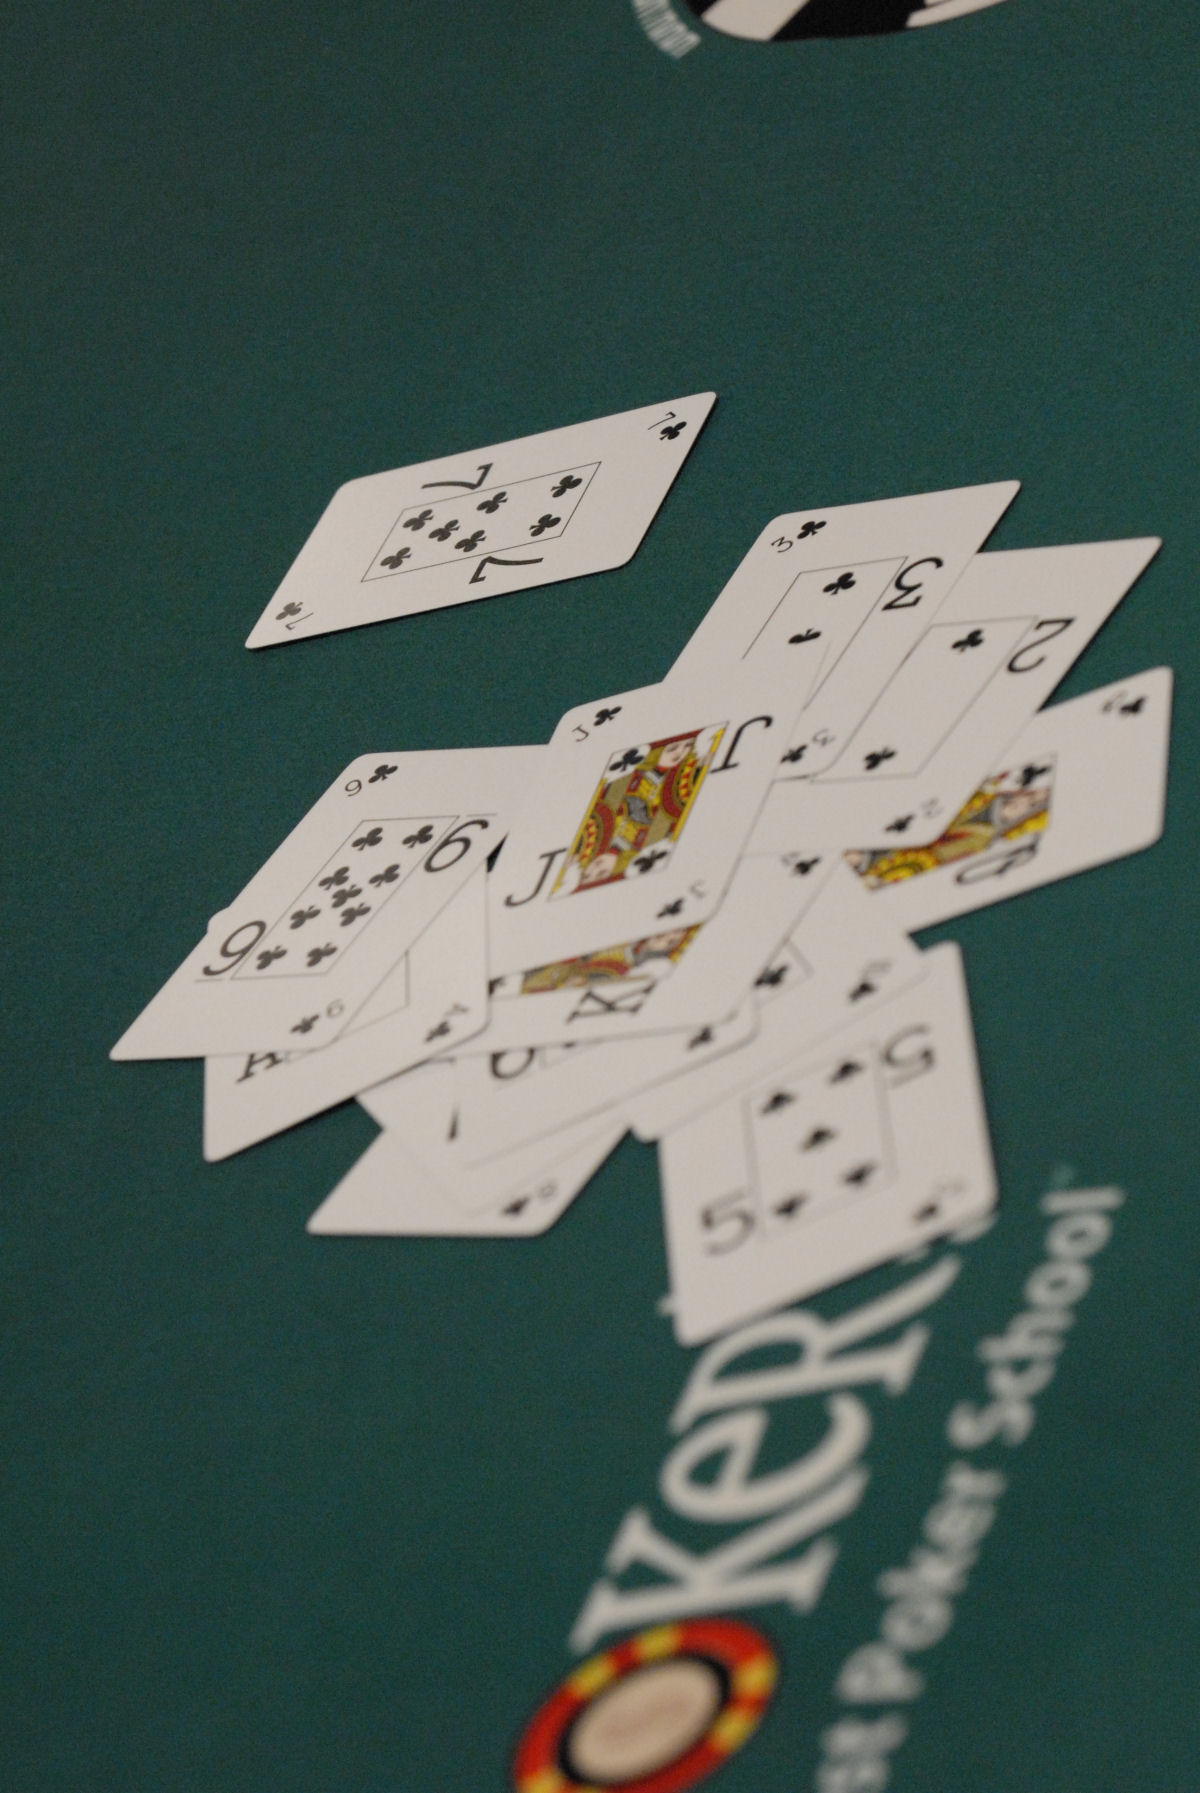 3. Strategies for Playing Pai Gow‍ Poker